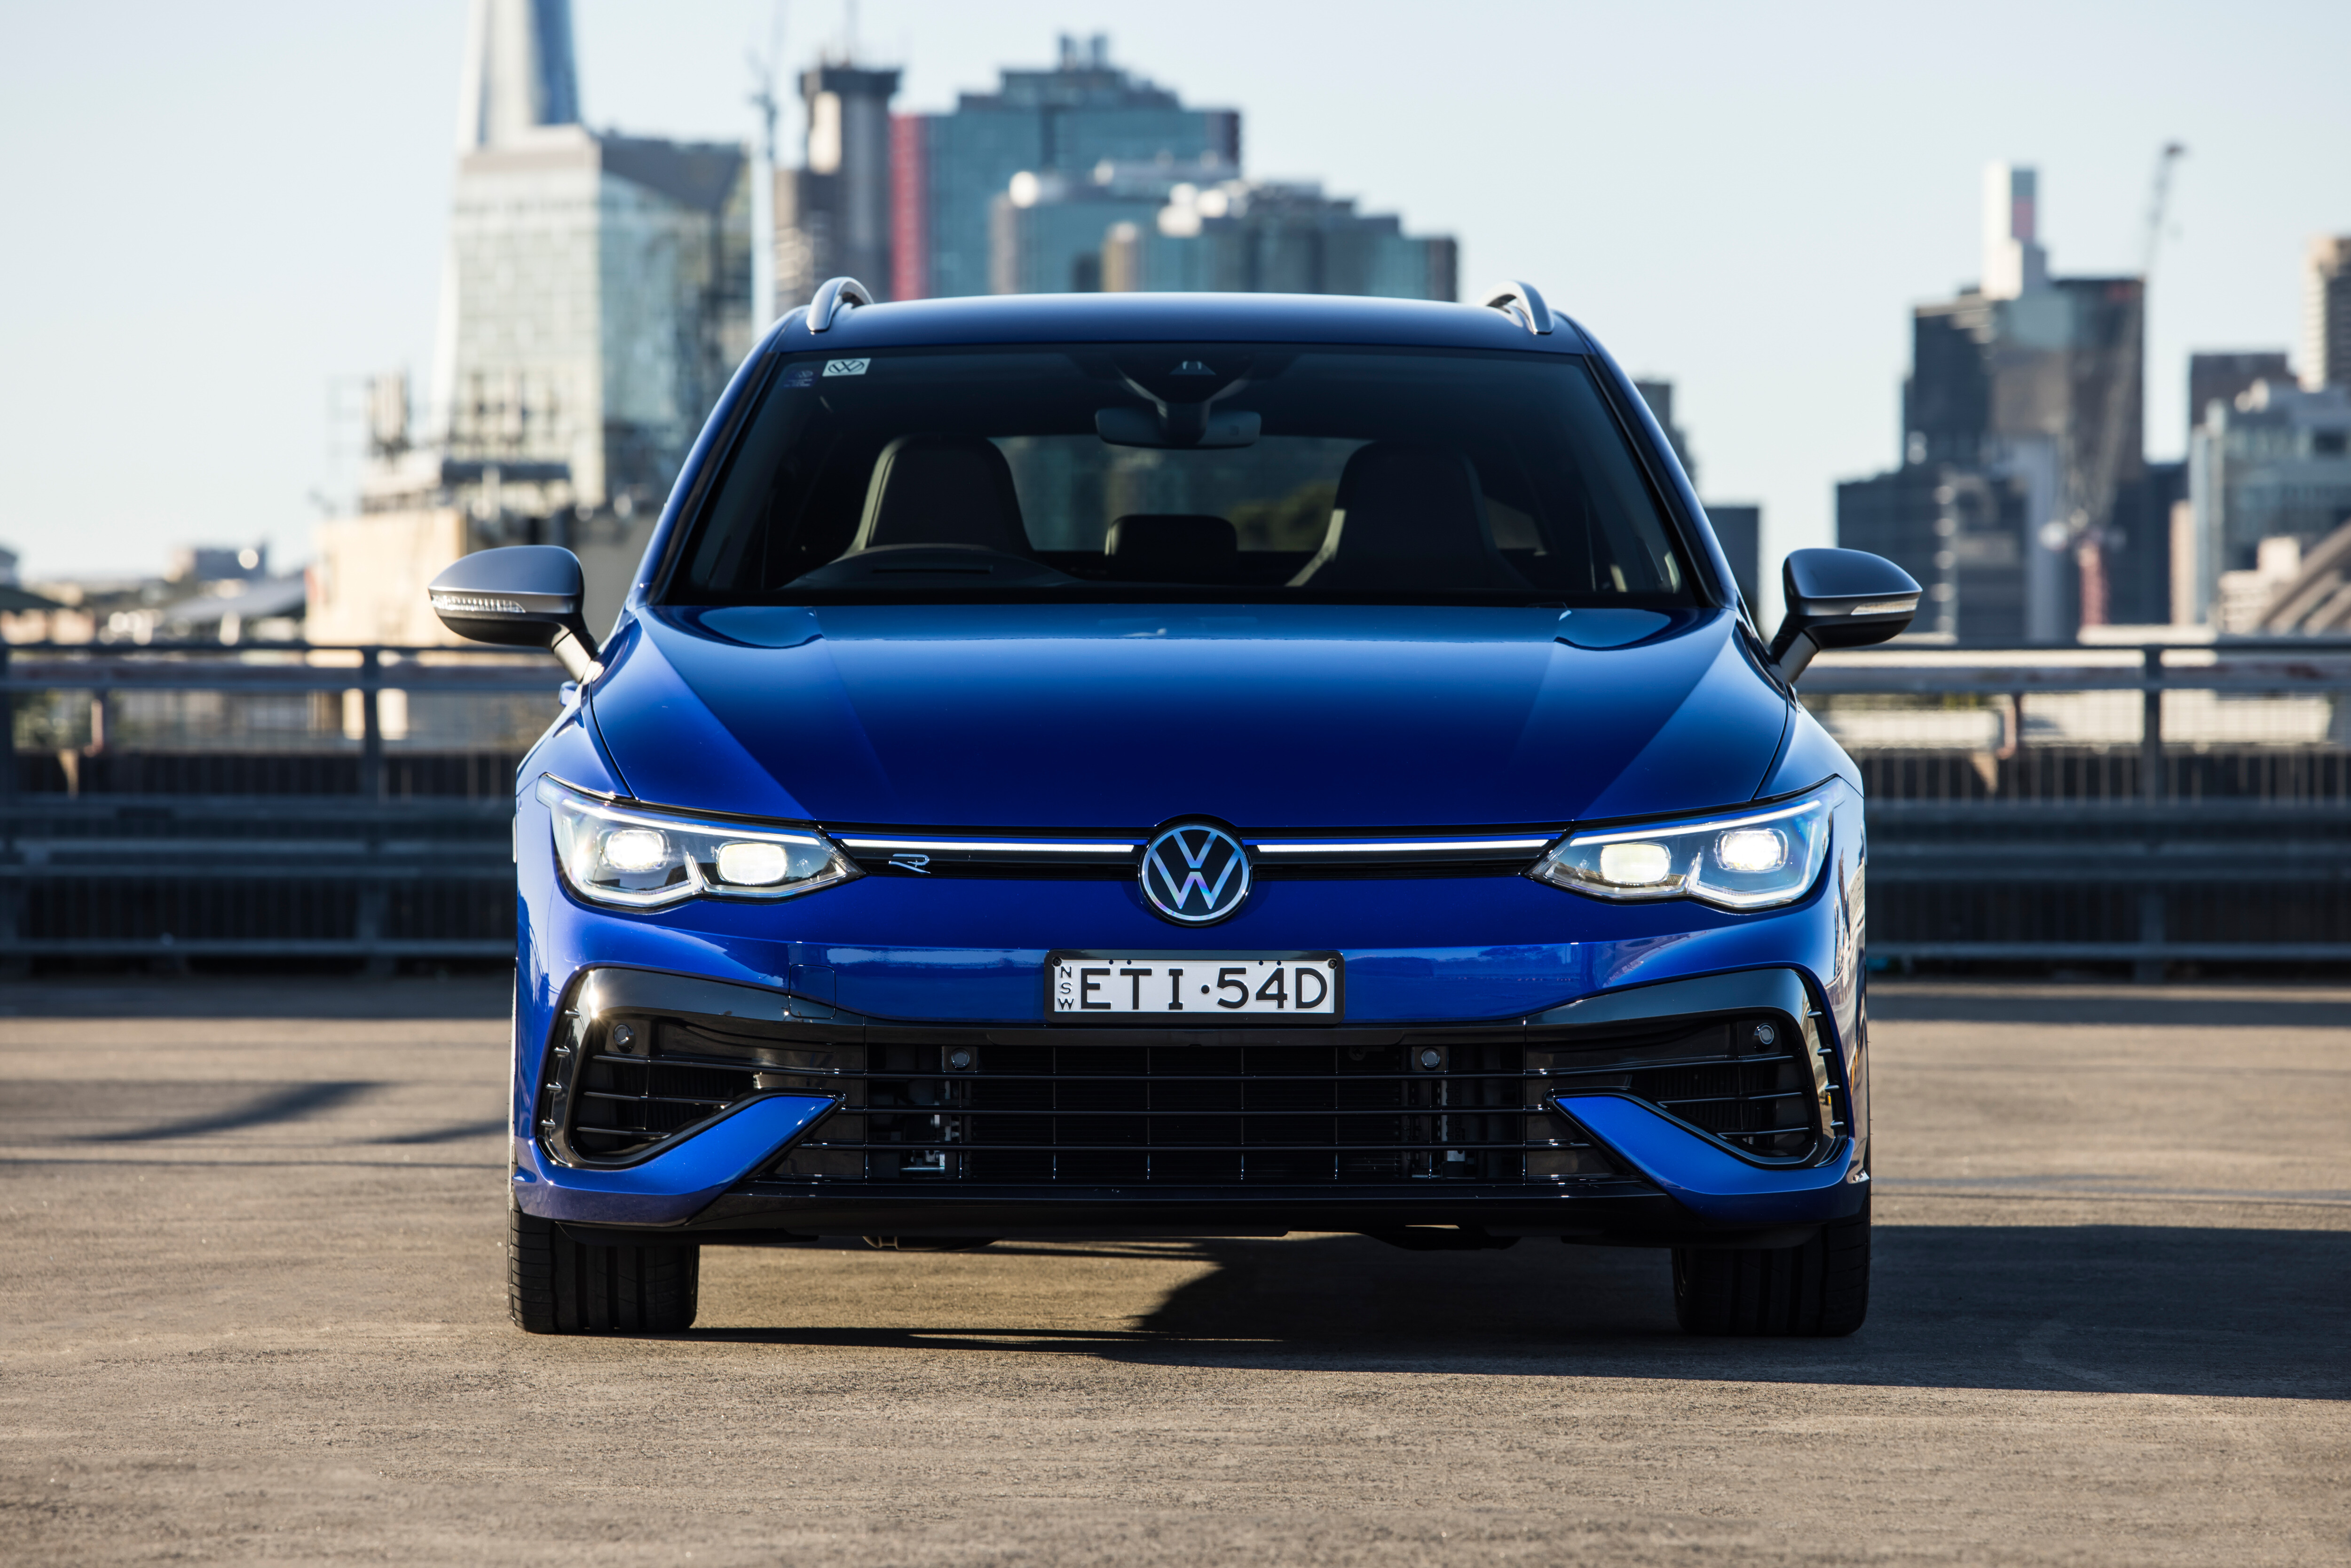 2022 Volkswagen Golf R Australian pricing and features Hatch & wagon